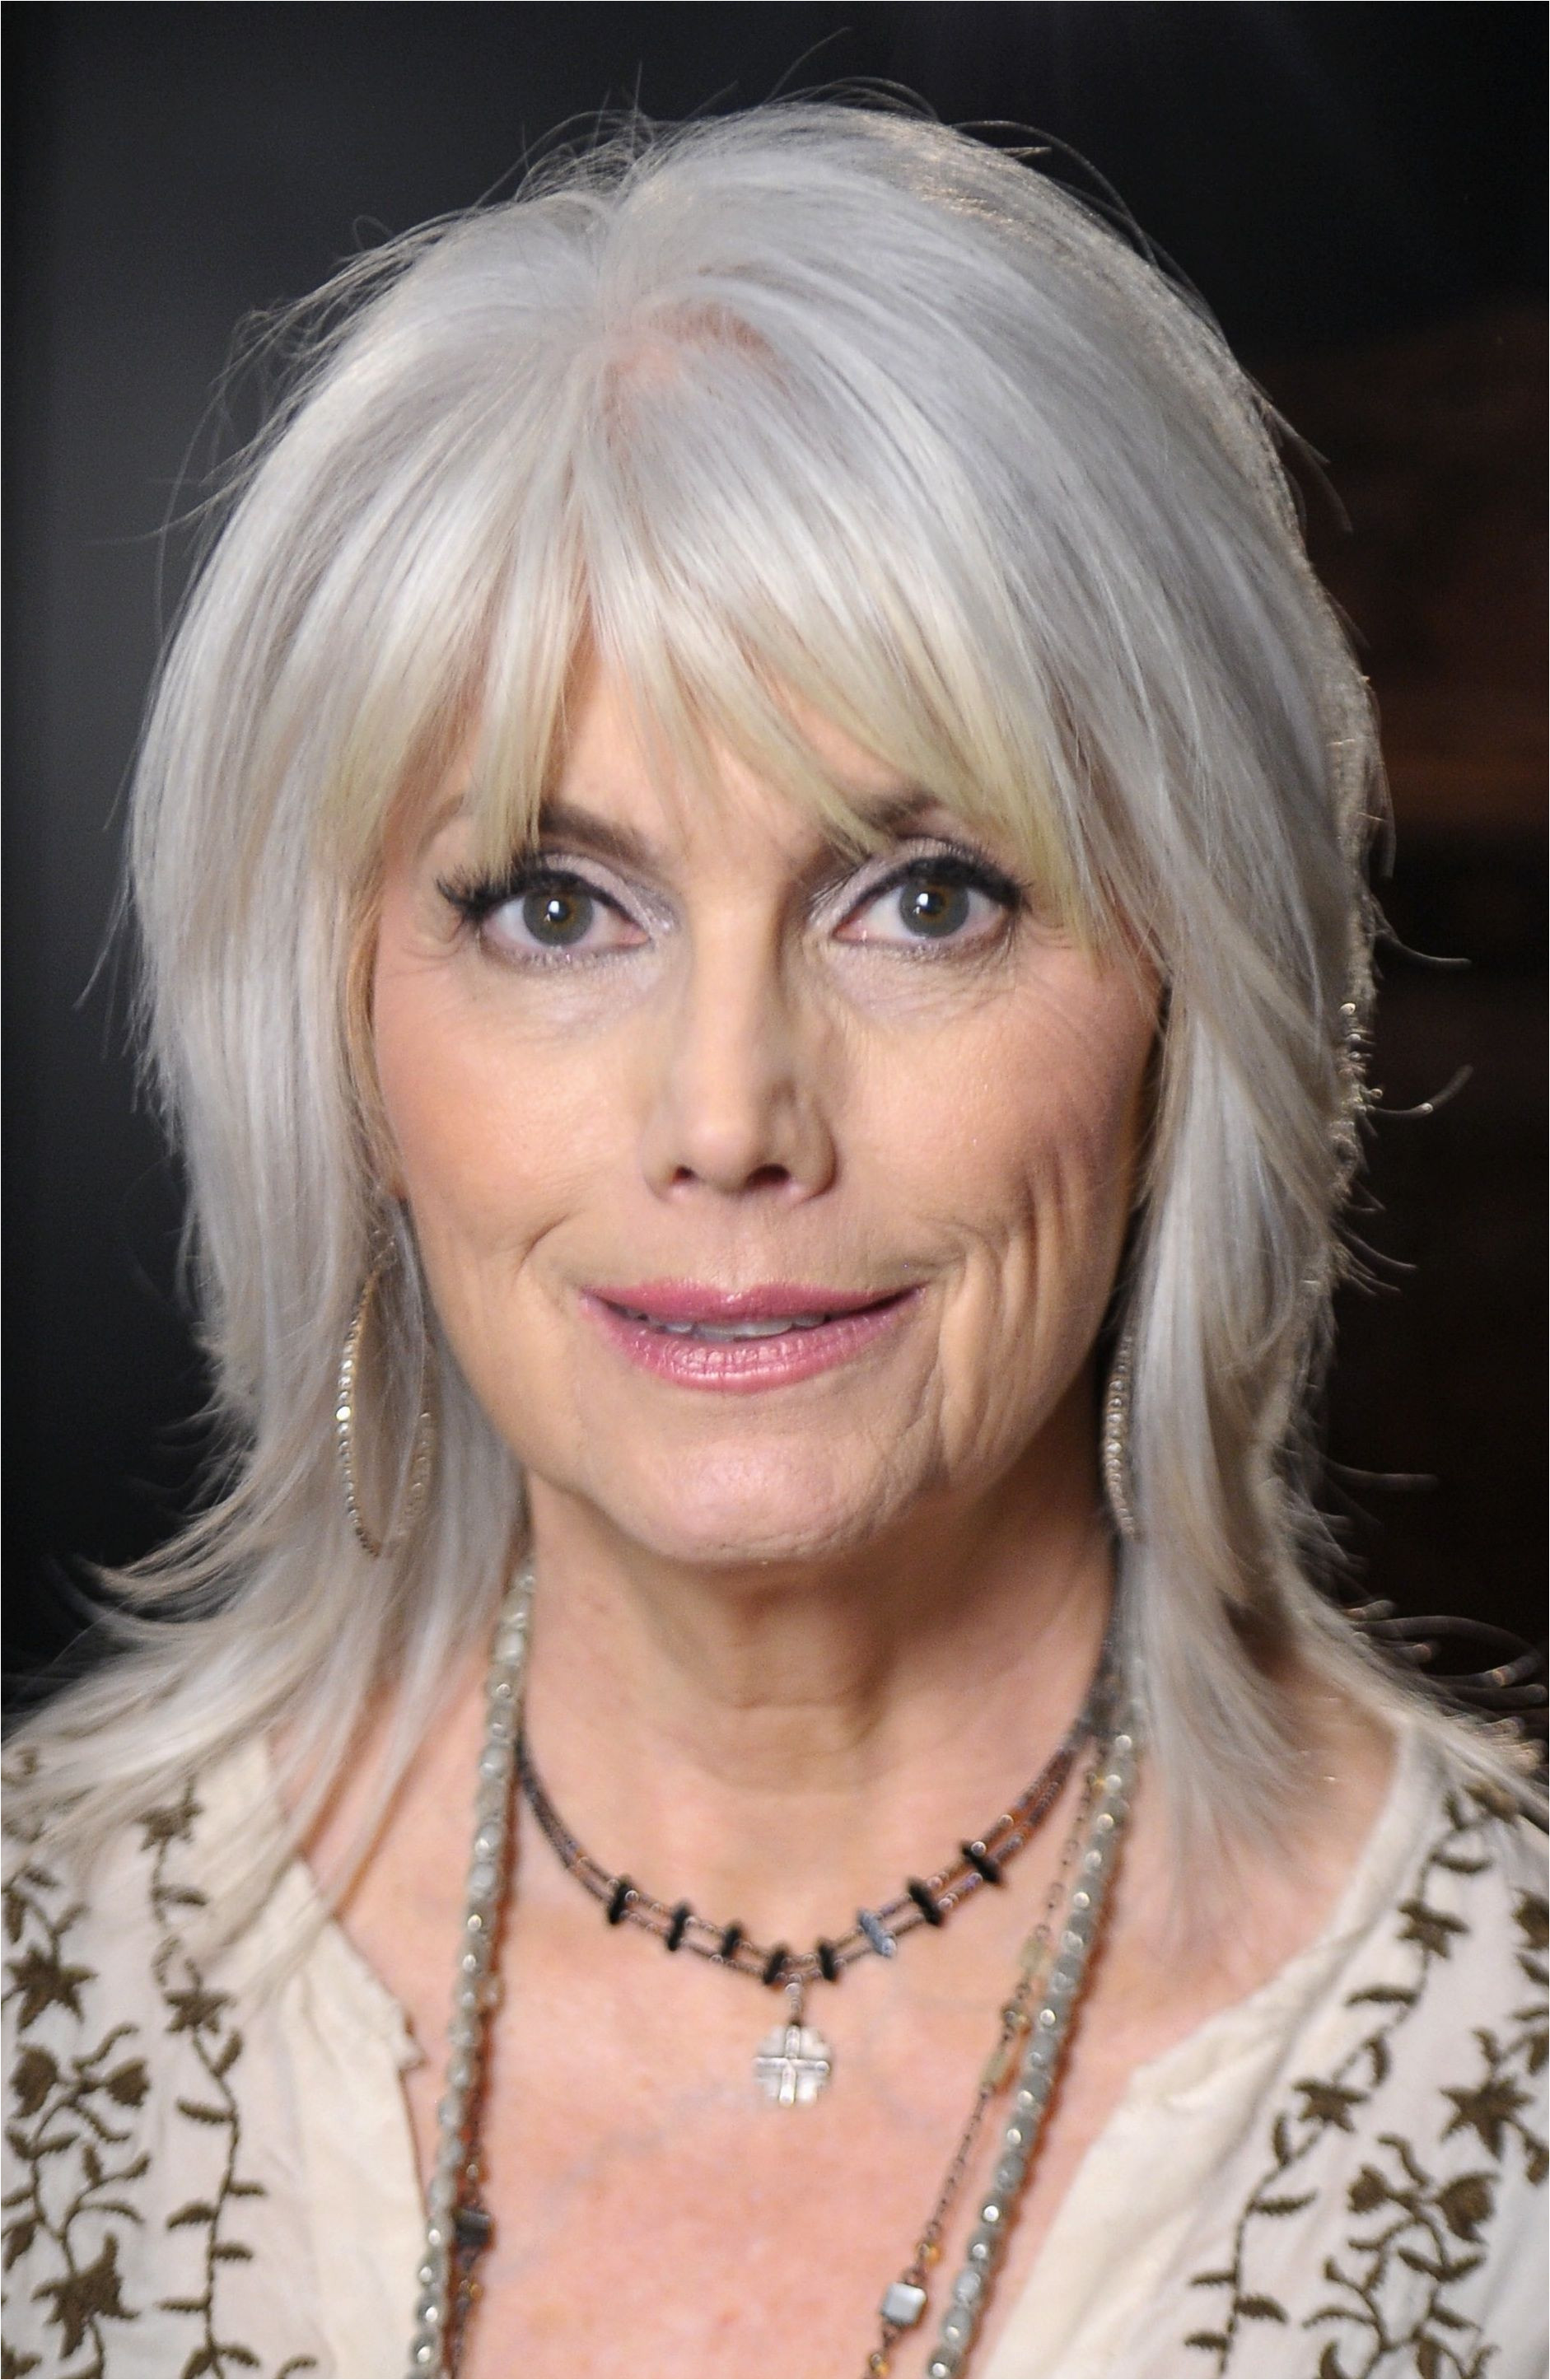 26 of the Most Amazing Shag Hairstyles Emmylou Harris Another example of an older woman with a shag hairstyle